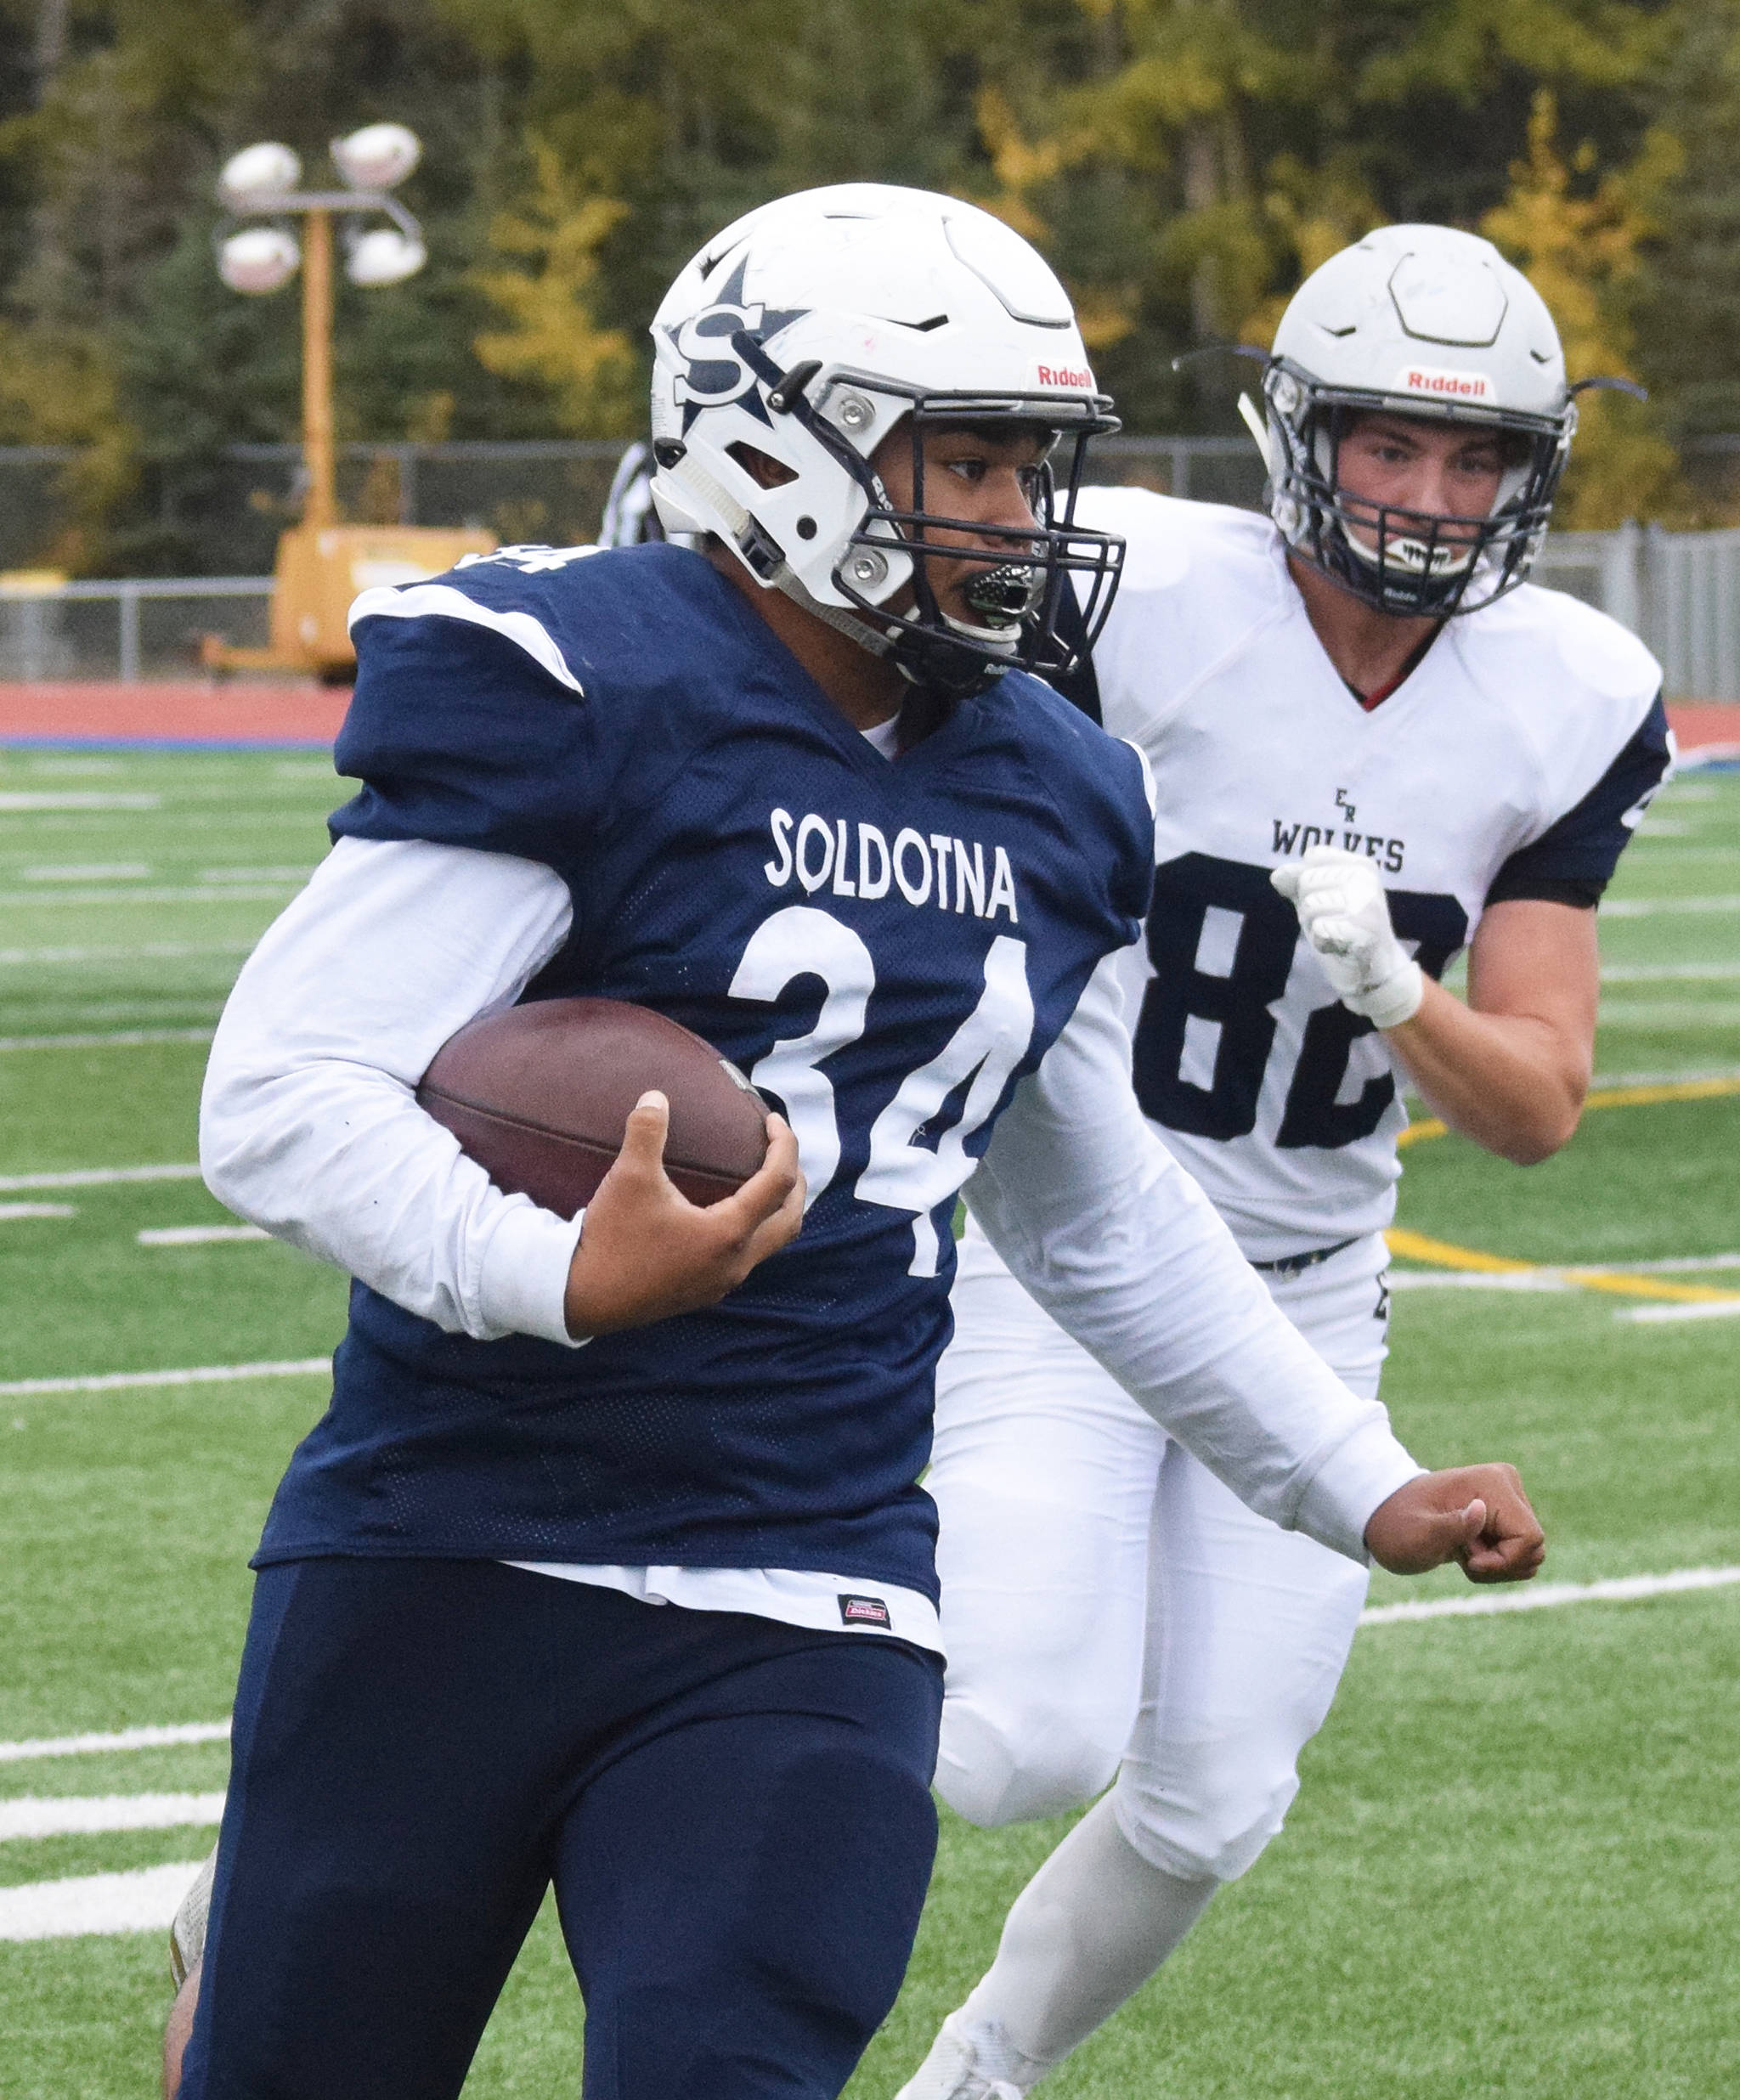 Soldotna’s Aaron Faletoi breaks away from Eagle River defender Samuel Thompson, Saturday, Sept. 28, 2019, against Eagle River at Justin Maile Field in Soldotna. (Photo by Joey Klecka/Peninsula Clarion)